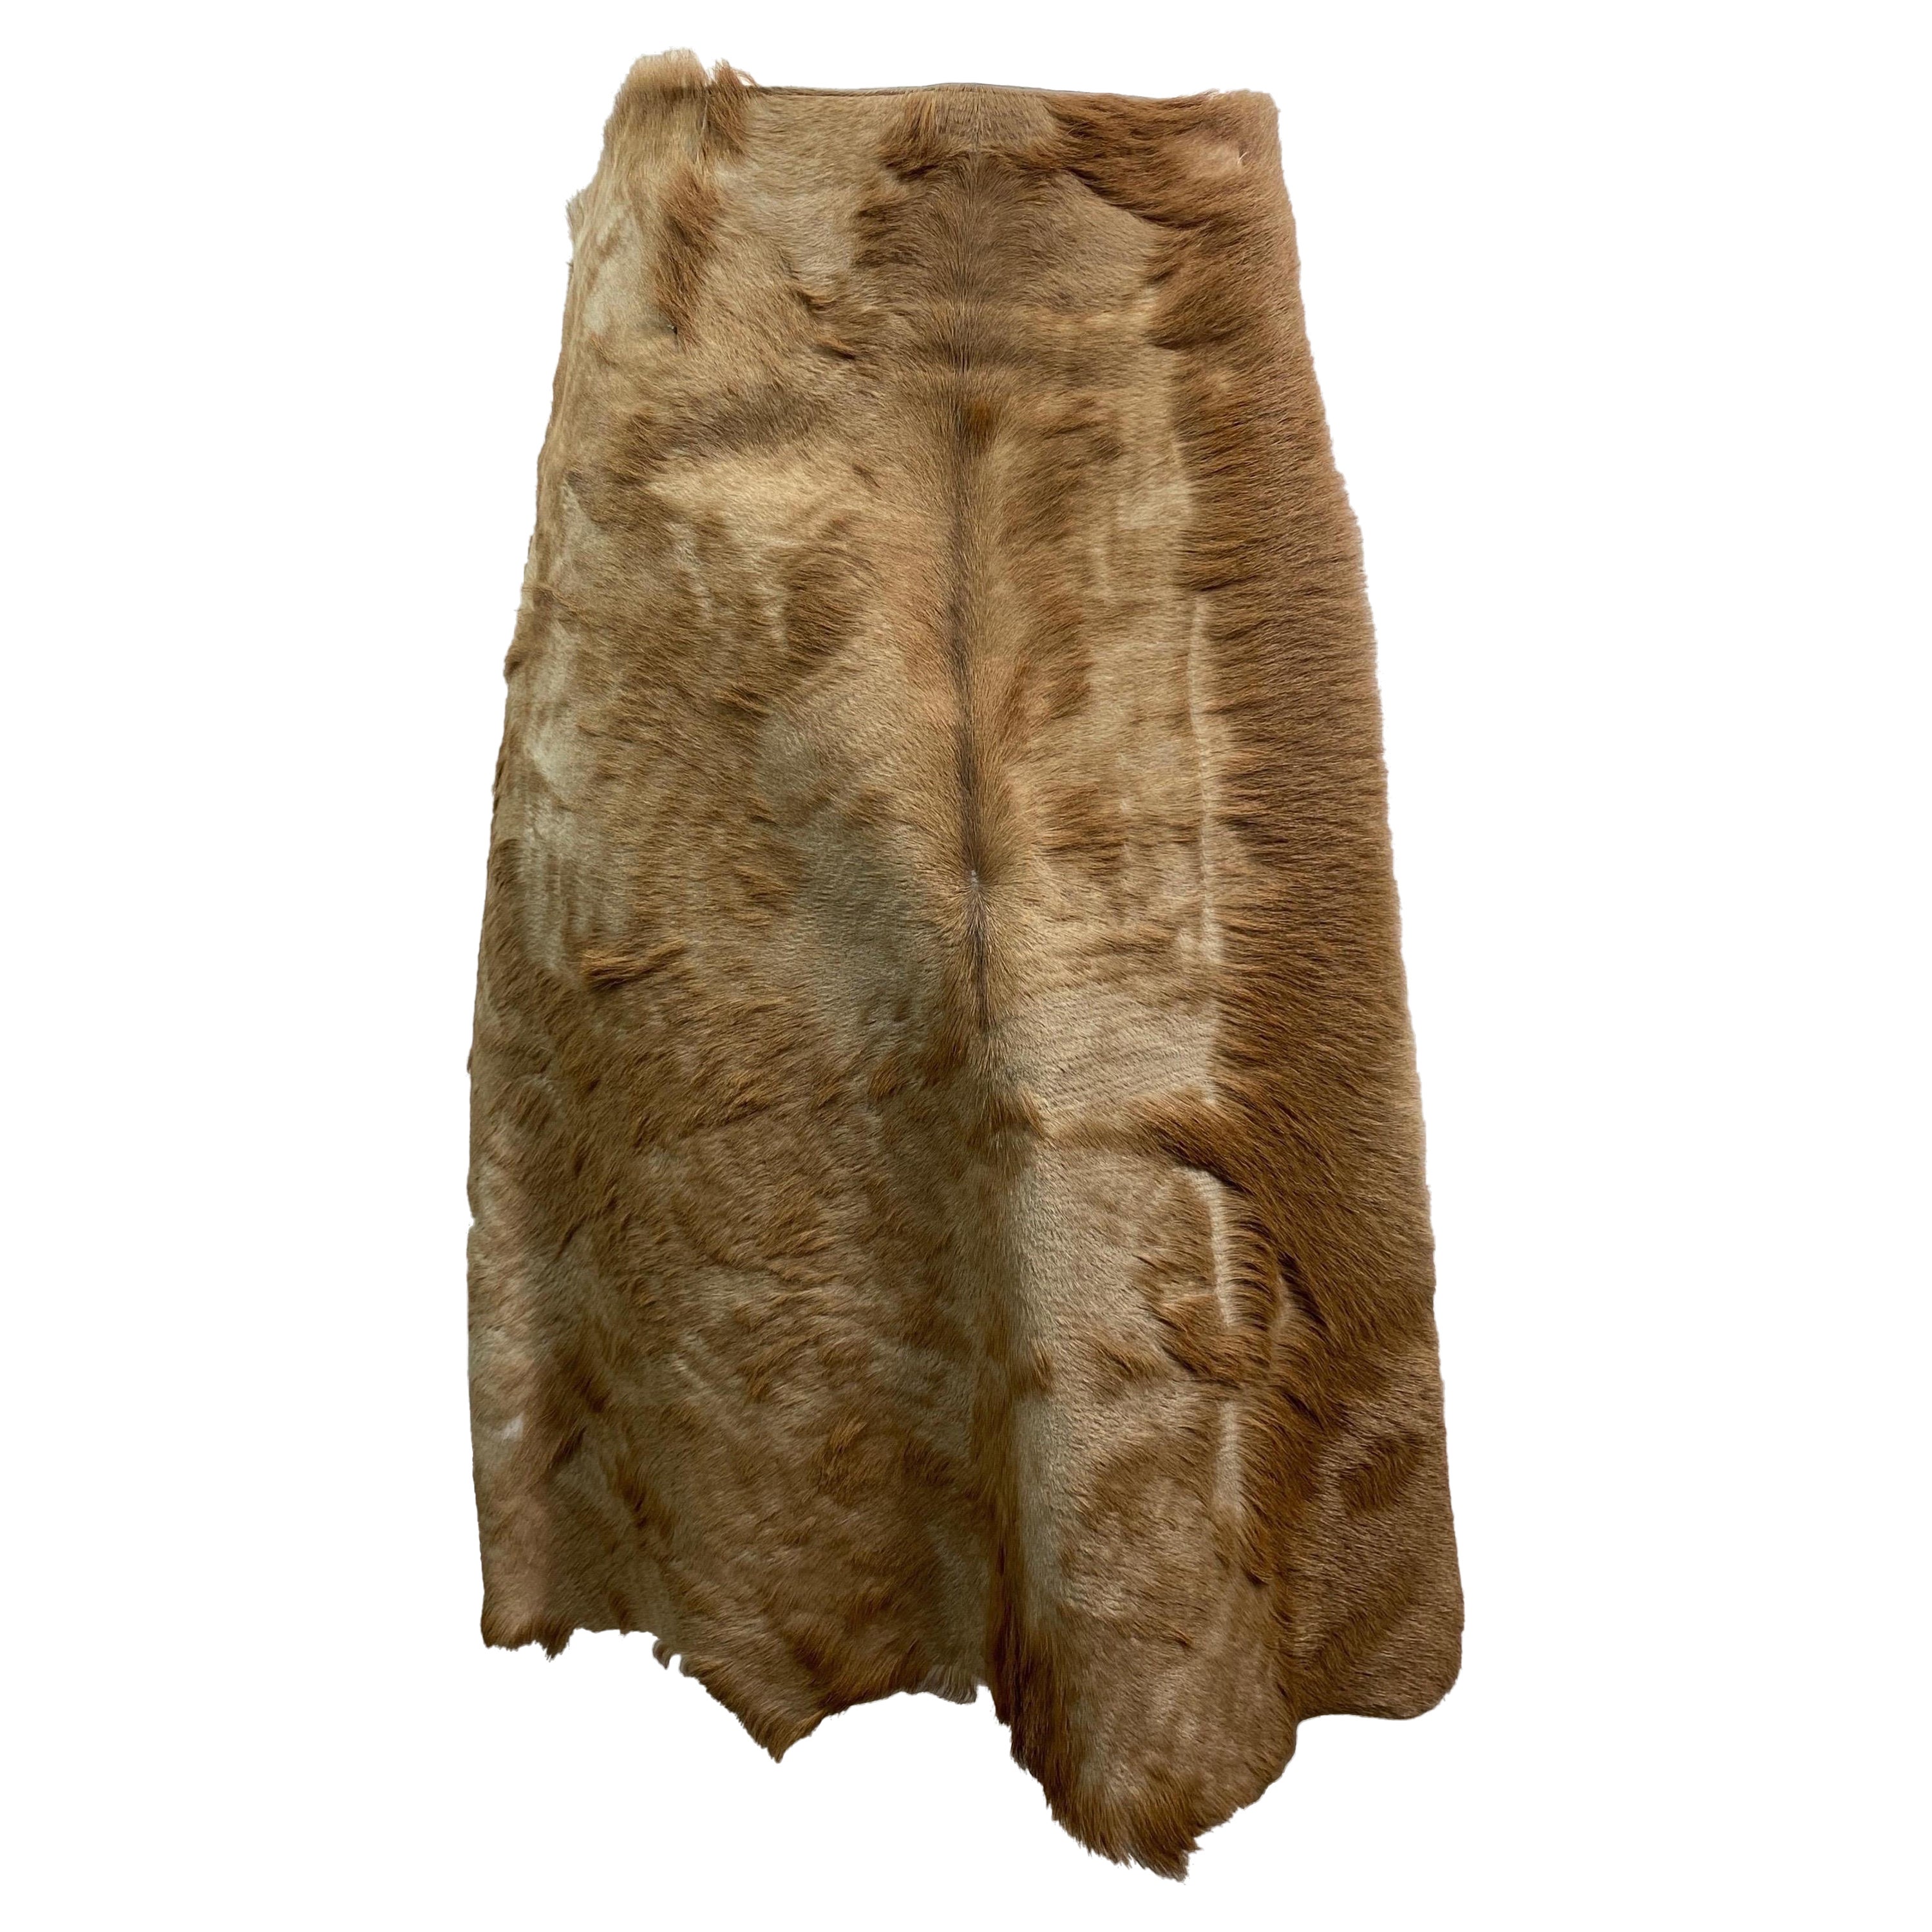 Fendi Runway Fall 1999 Pony Hair Leather Skirt -Size 42 For Sale